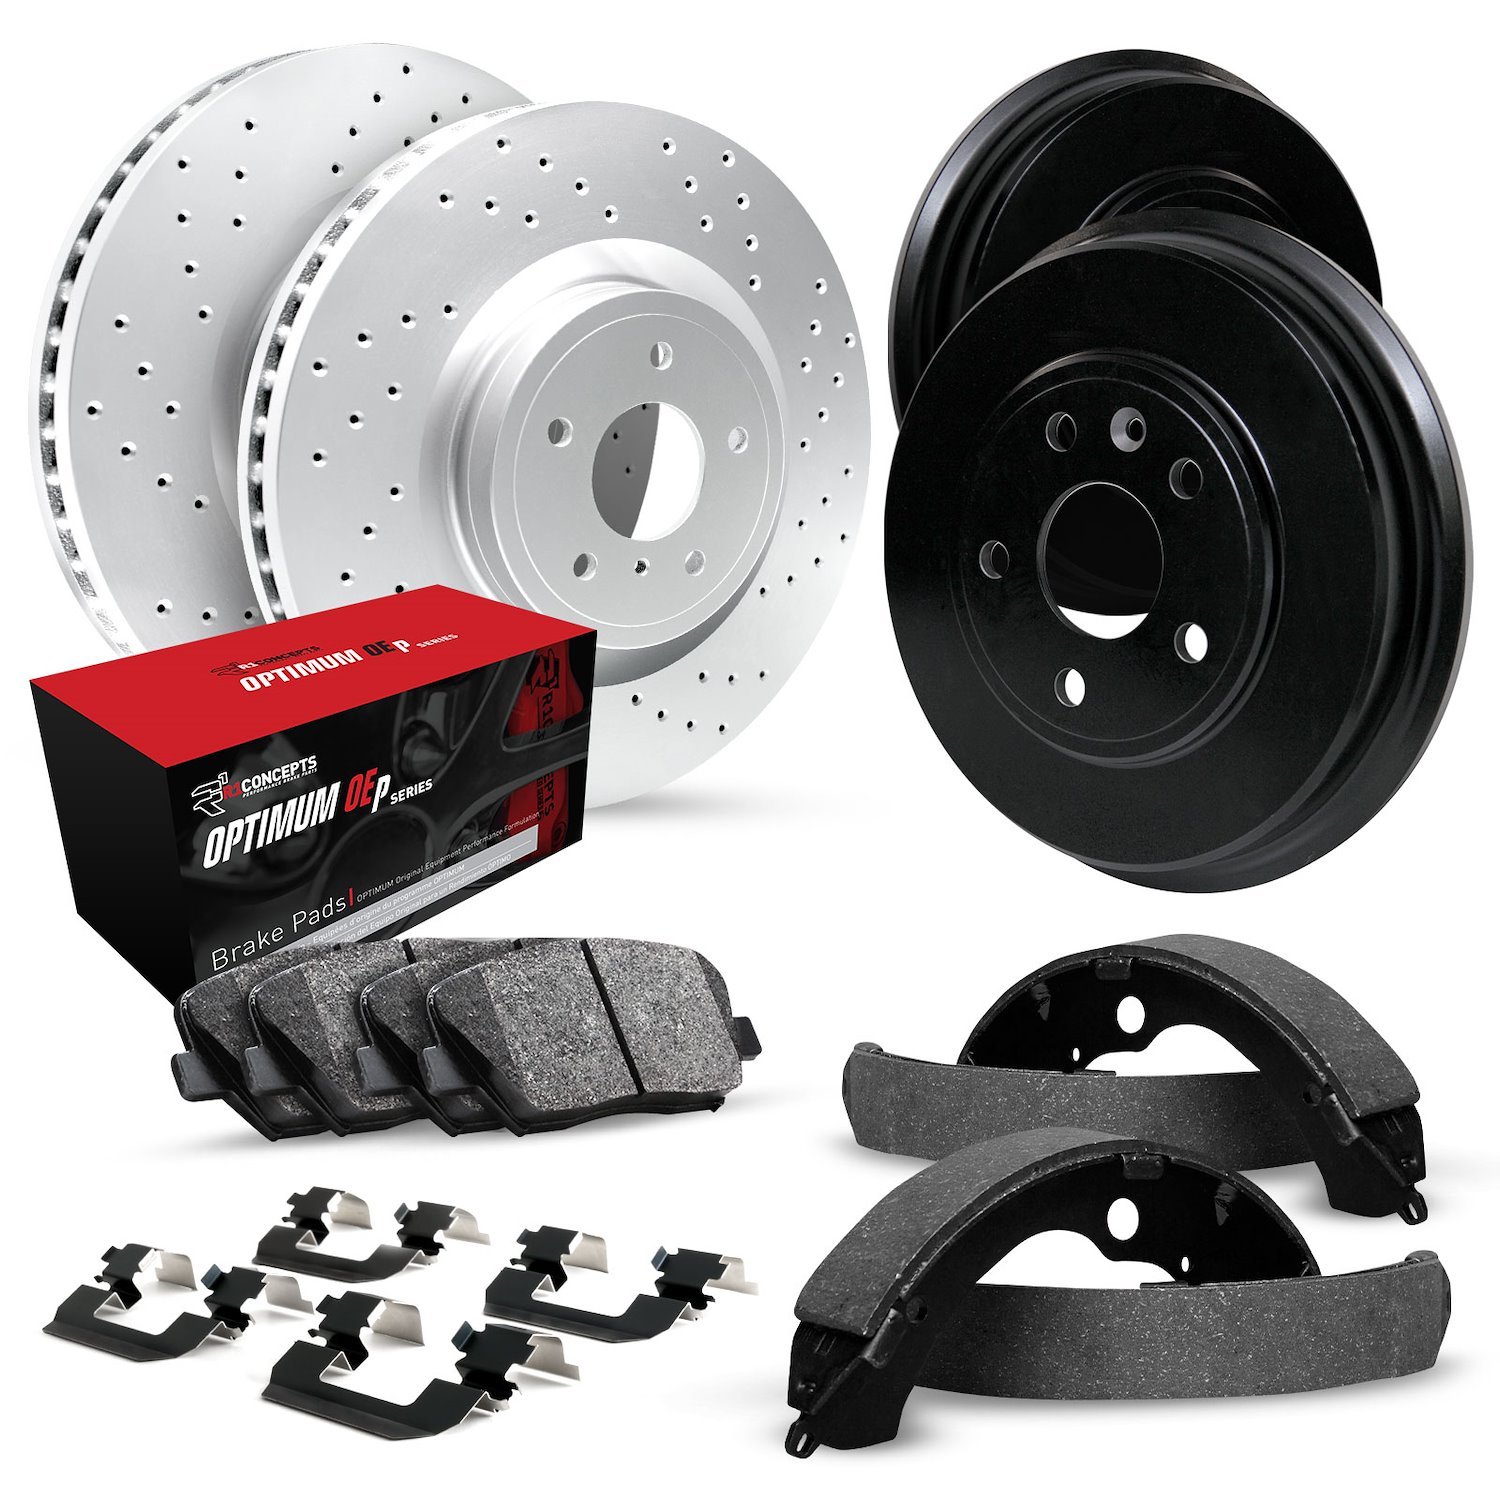 GEO-Carbon Drilled Brake Rotor & Drum Set w/Optimum OE Pads, Shoes, & Hardware, 1984-1990 GM, Position: Front & Rear